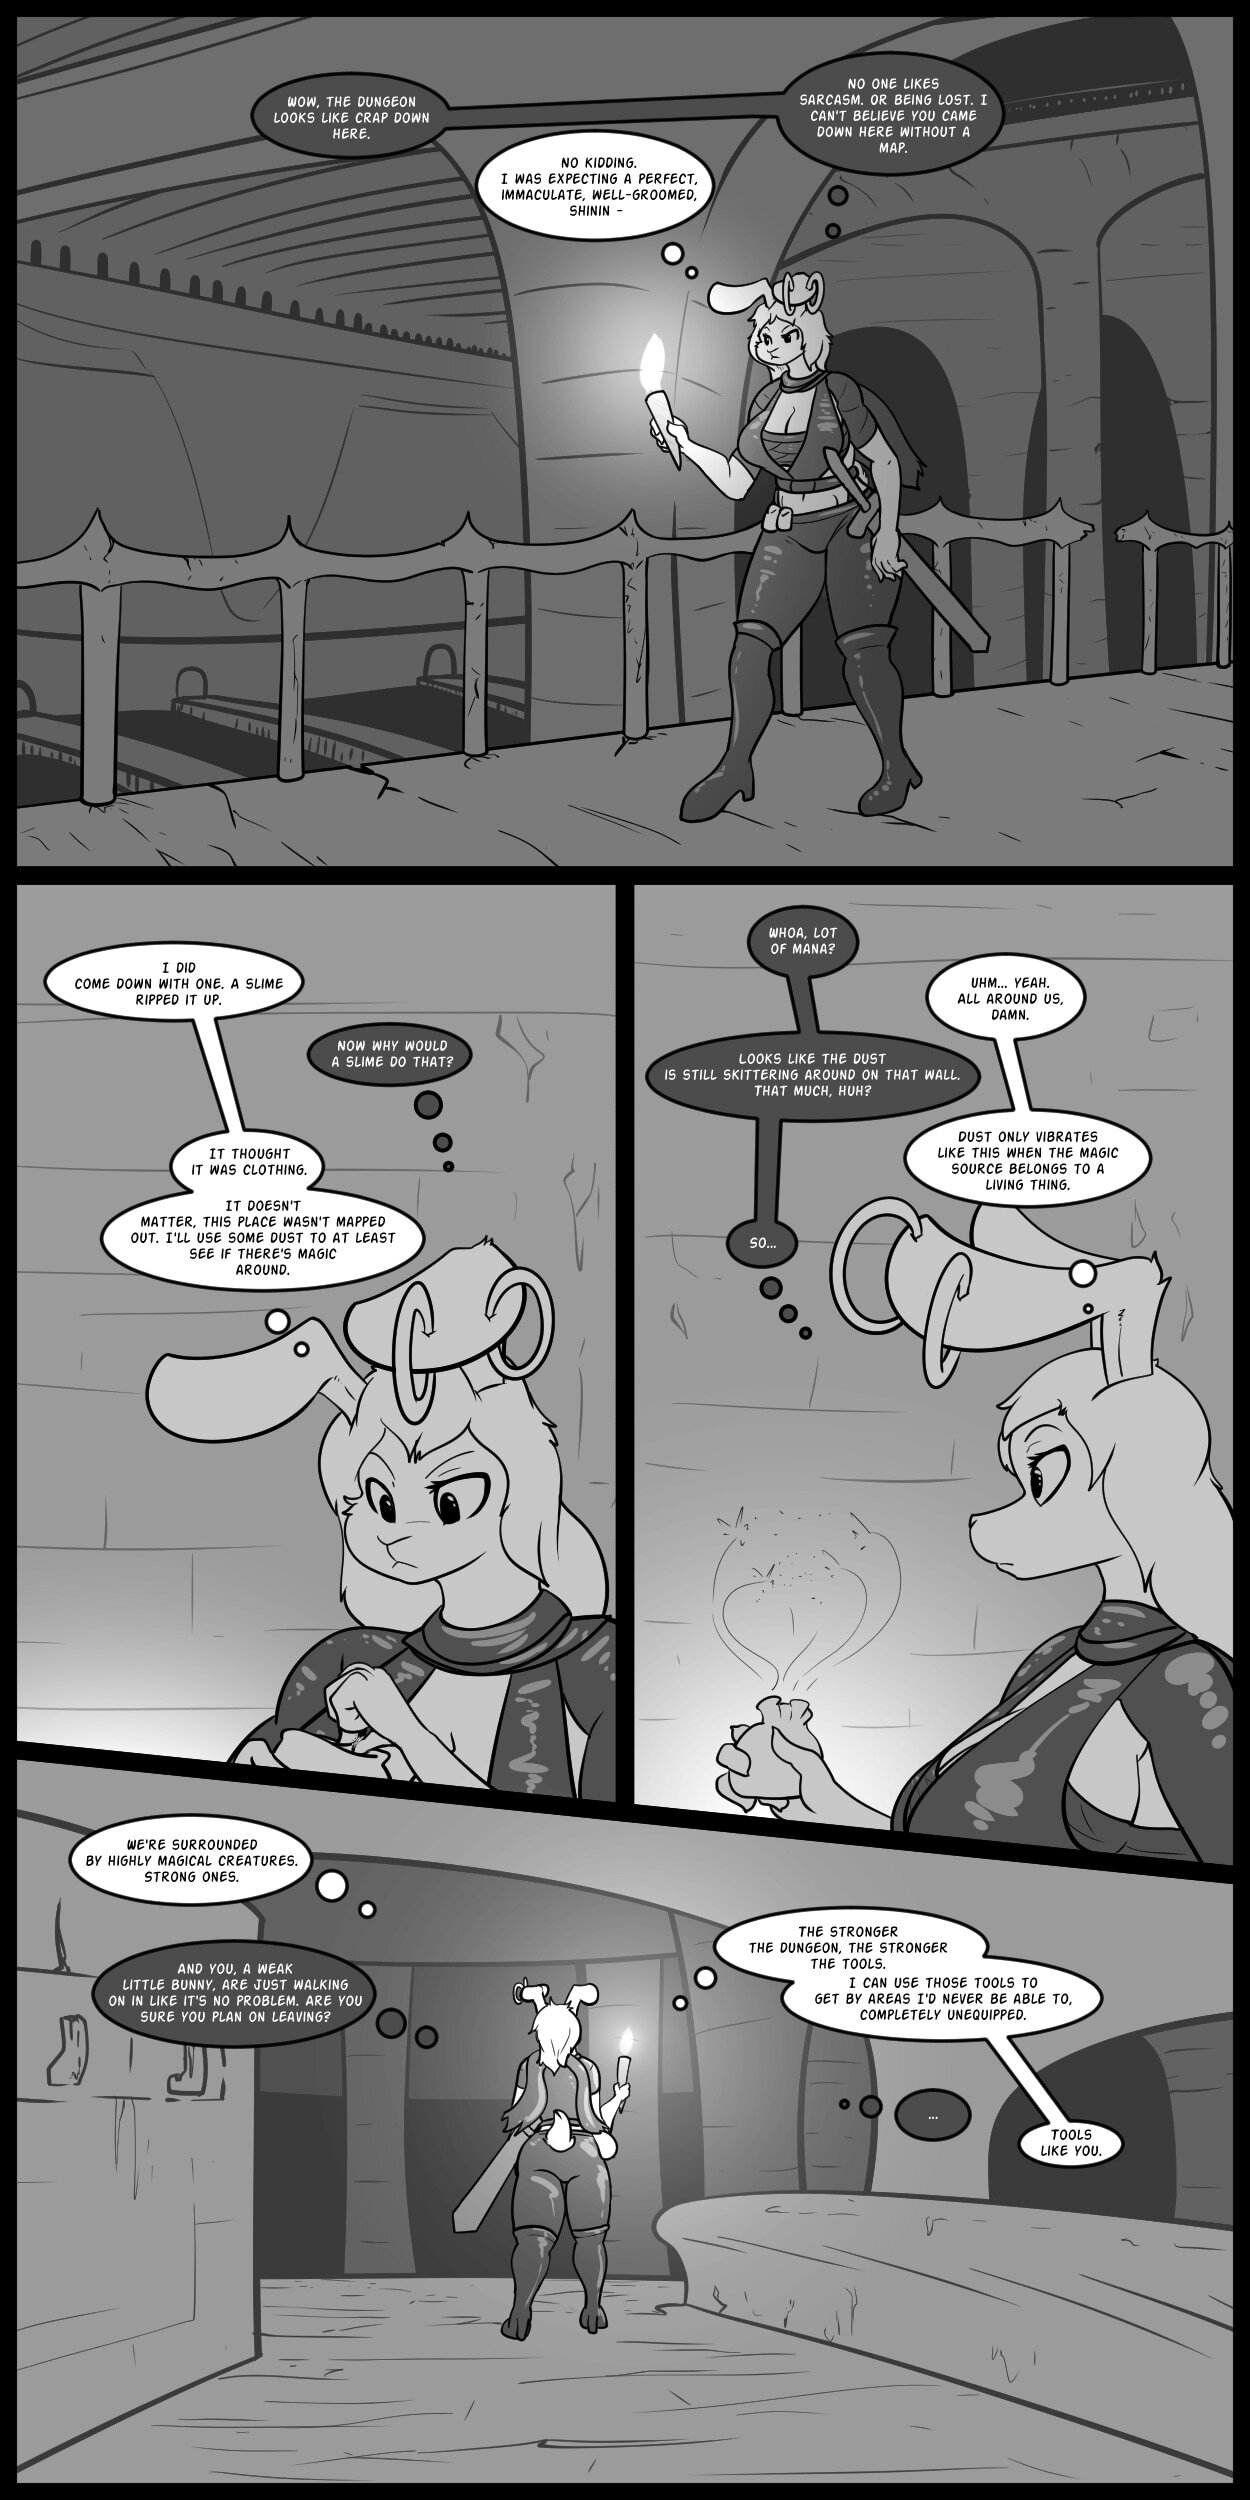 Rough Situation 2 - Page 2